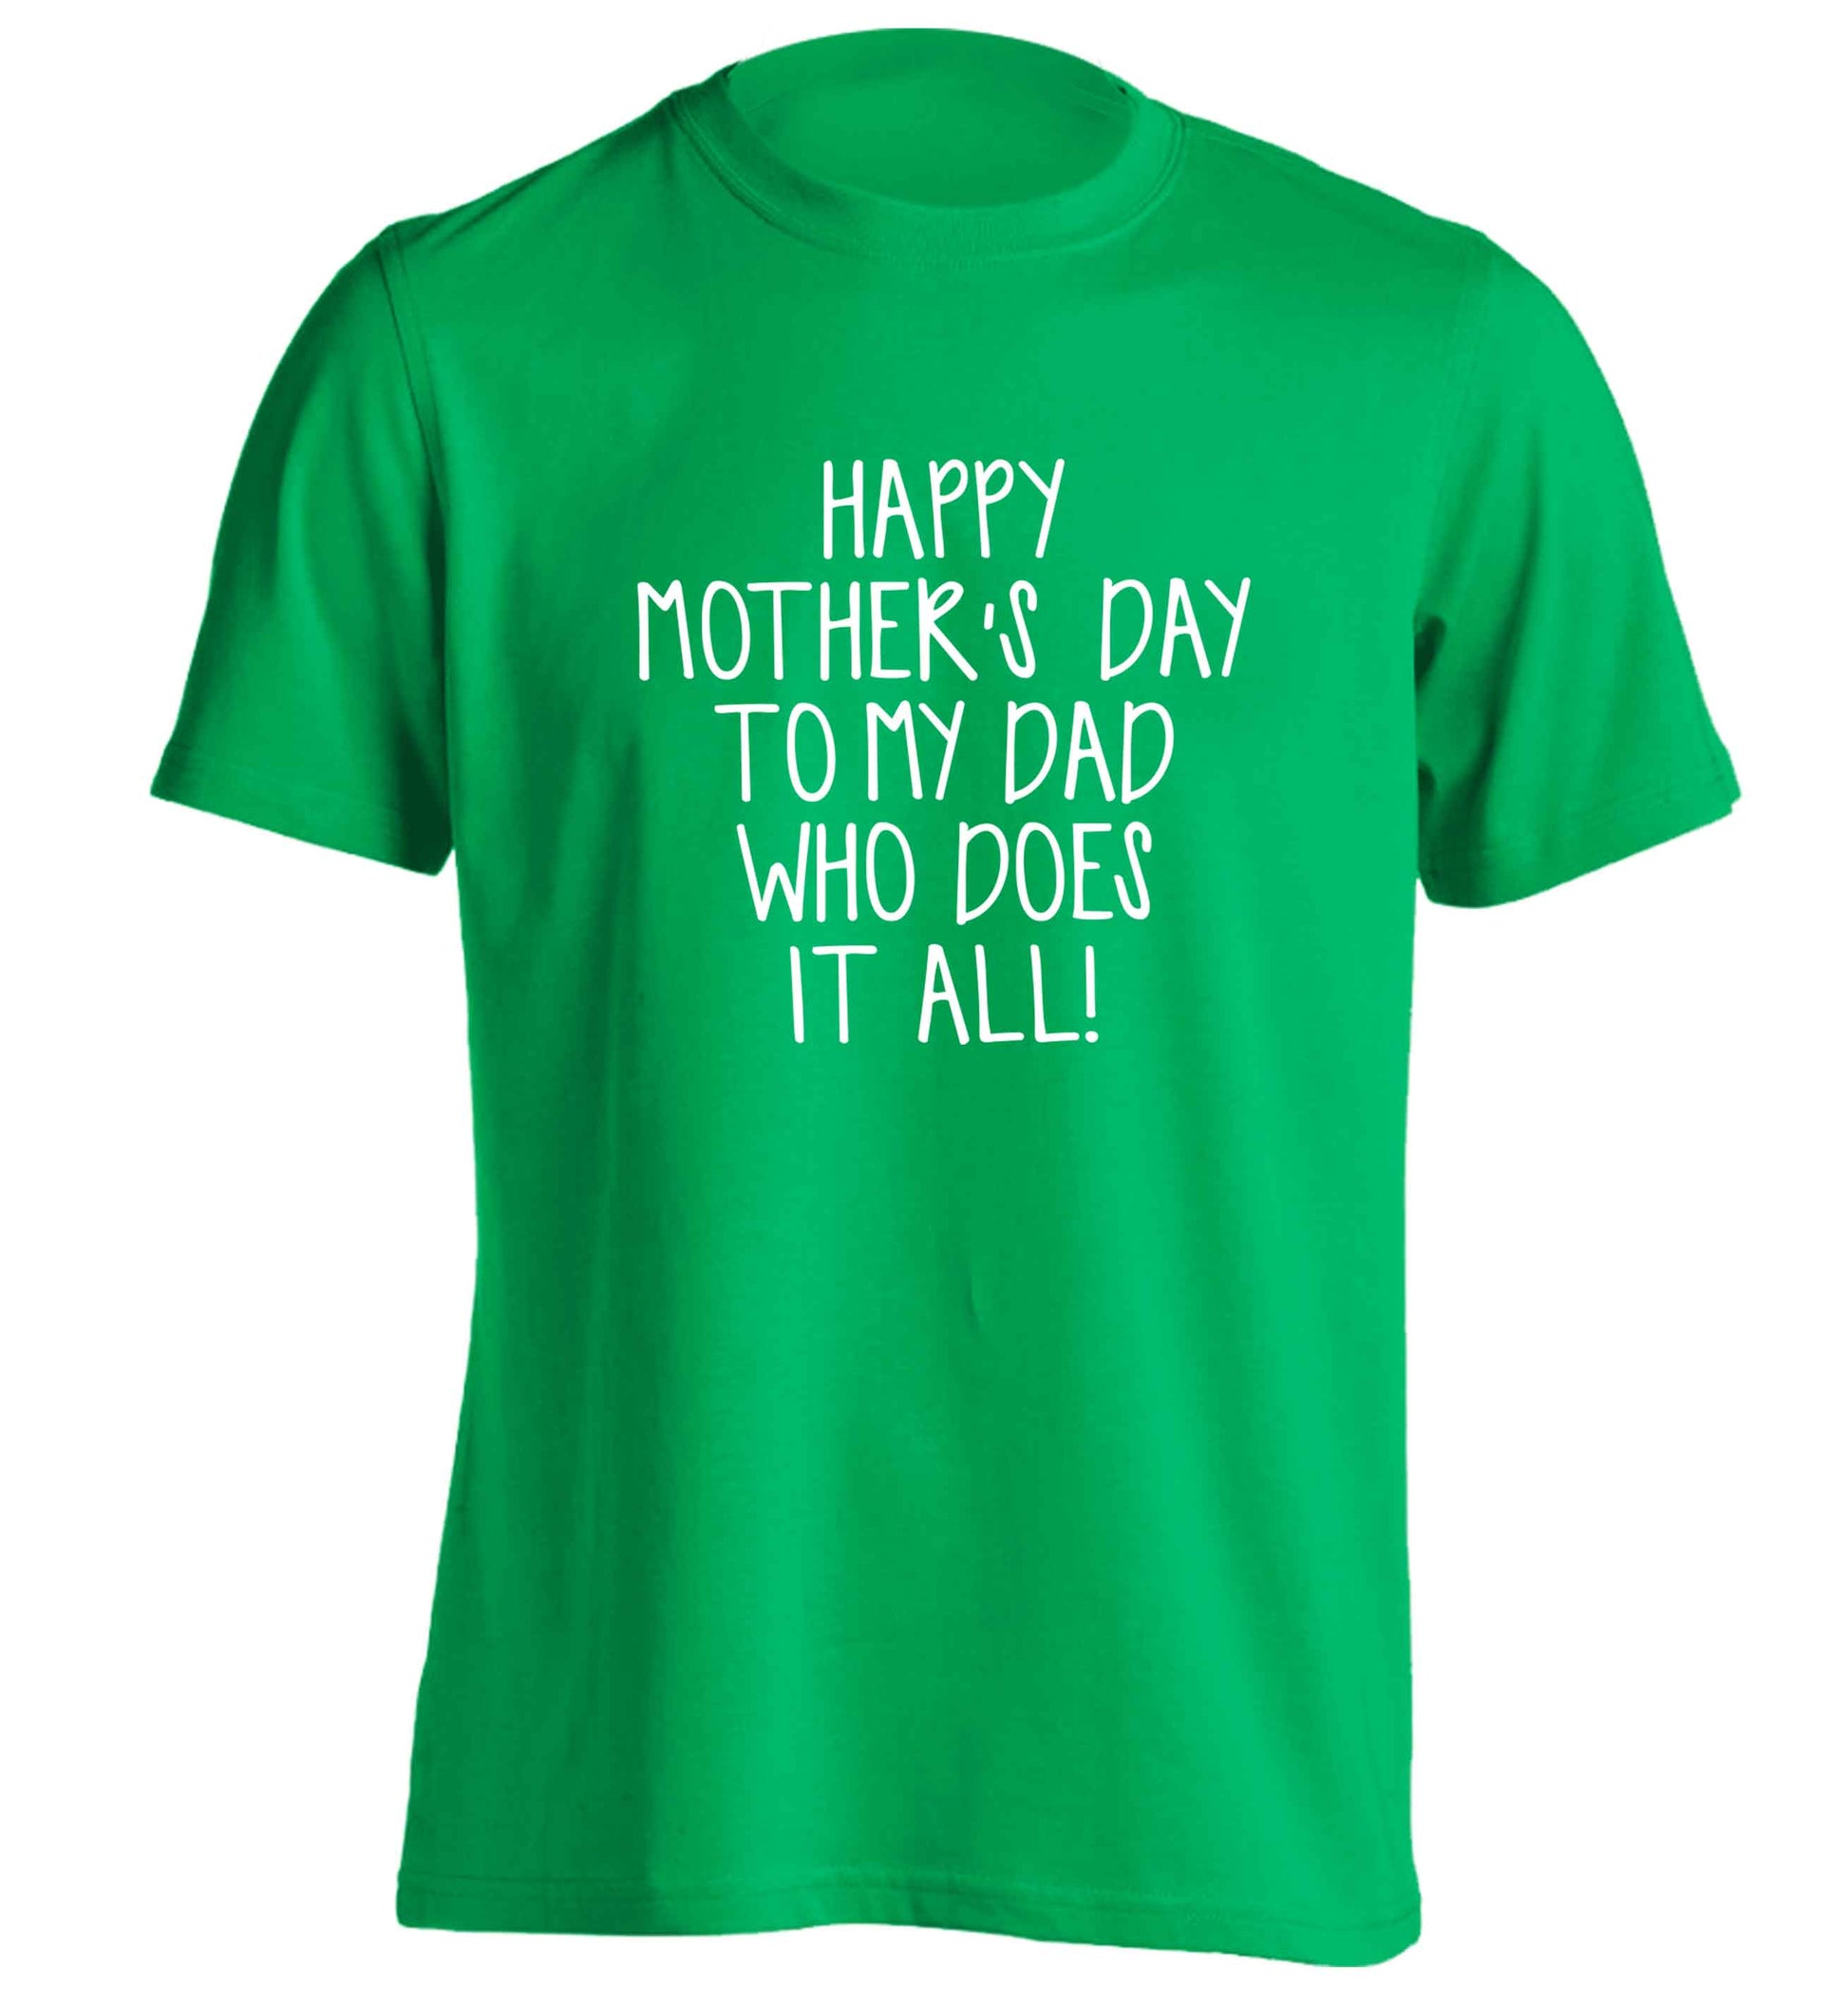 Happy mother's day to my dad who does it all! adults unisex green Tshirt 2XL